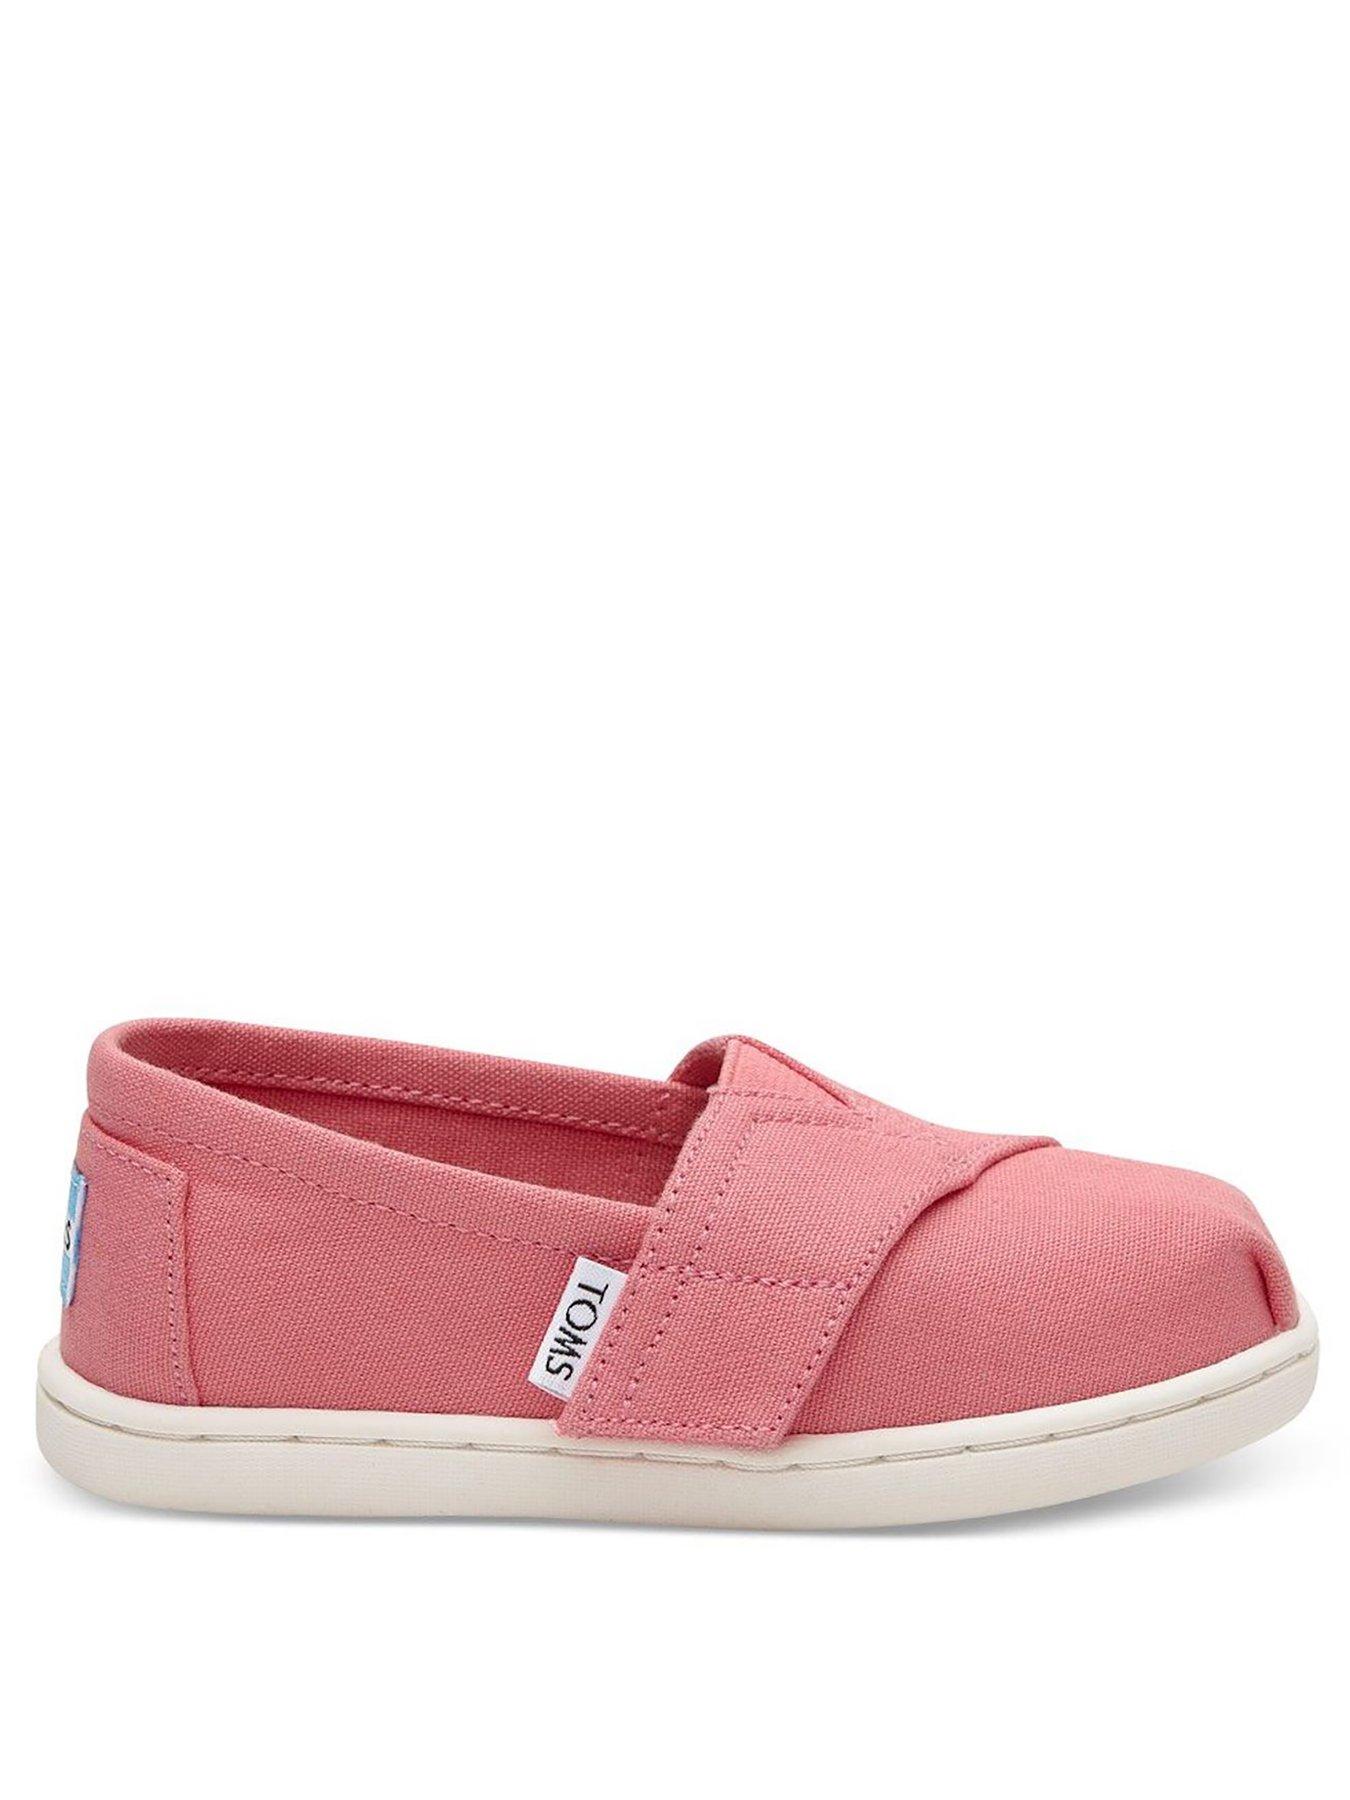 toms shoes for girls